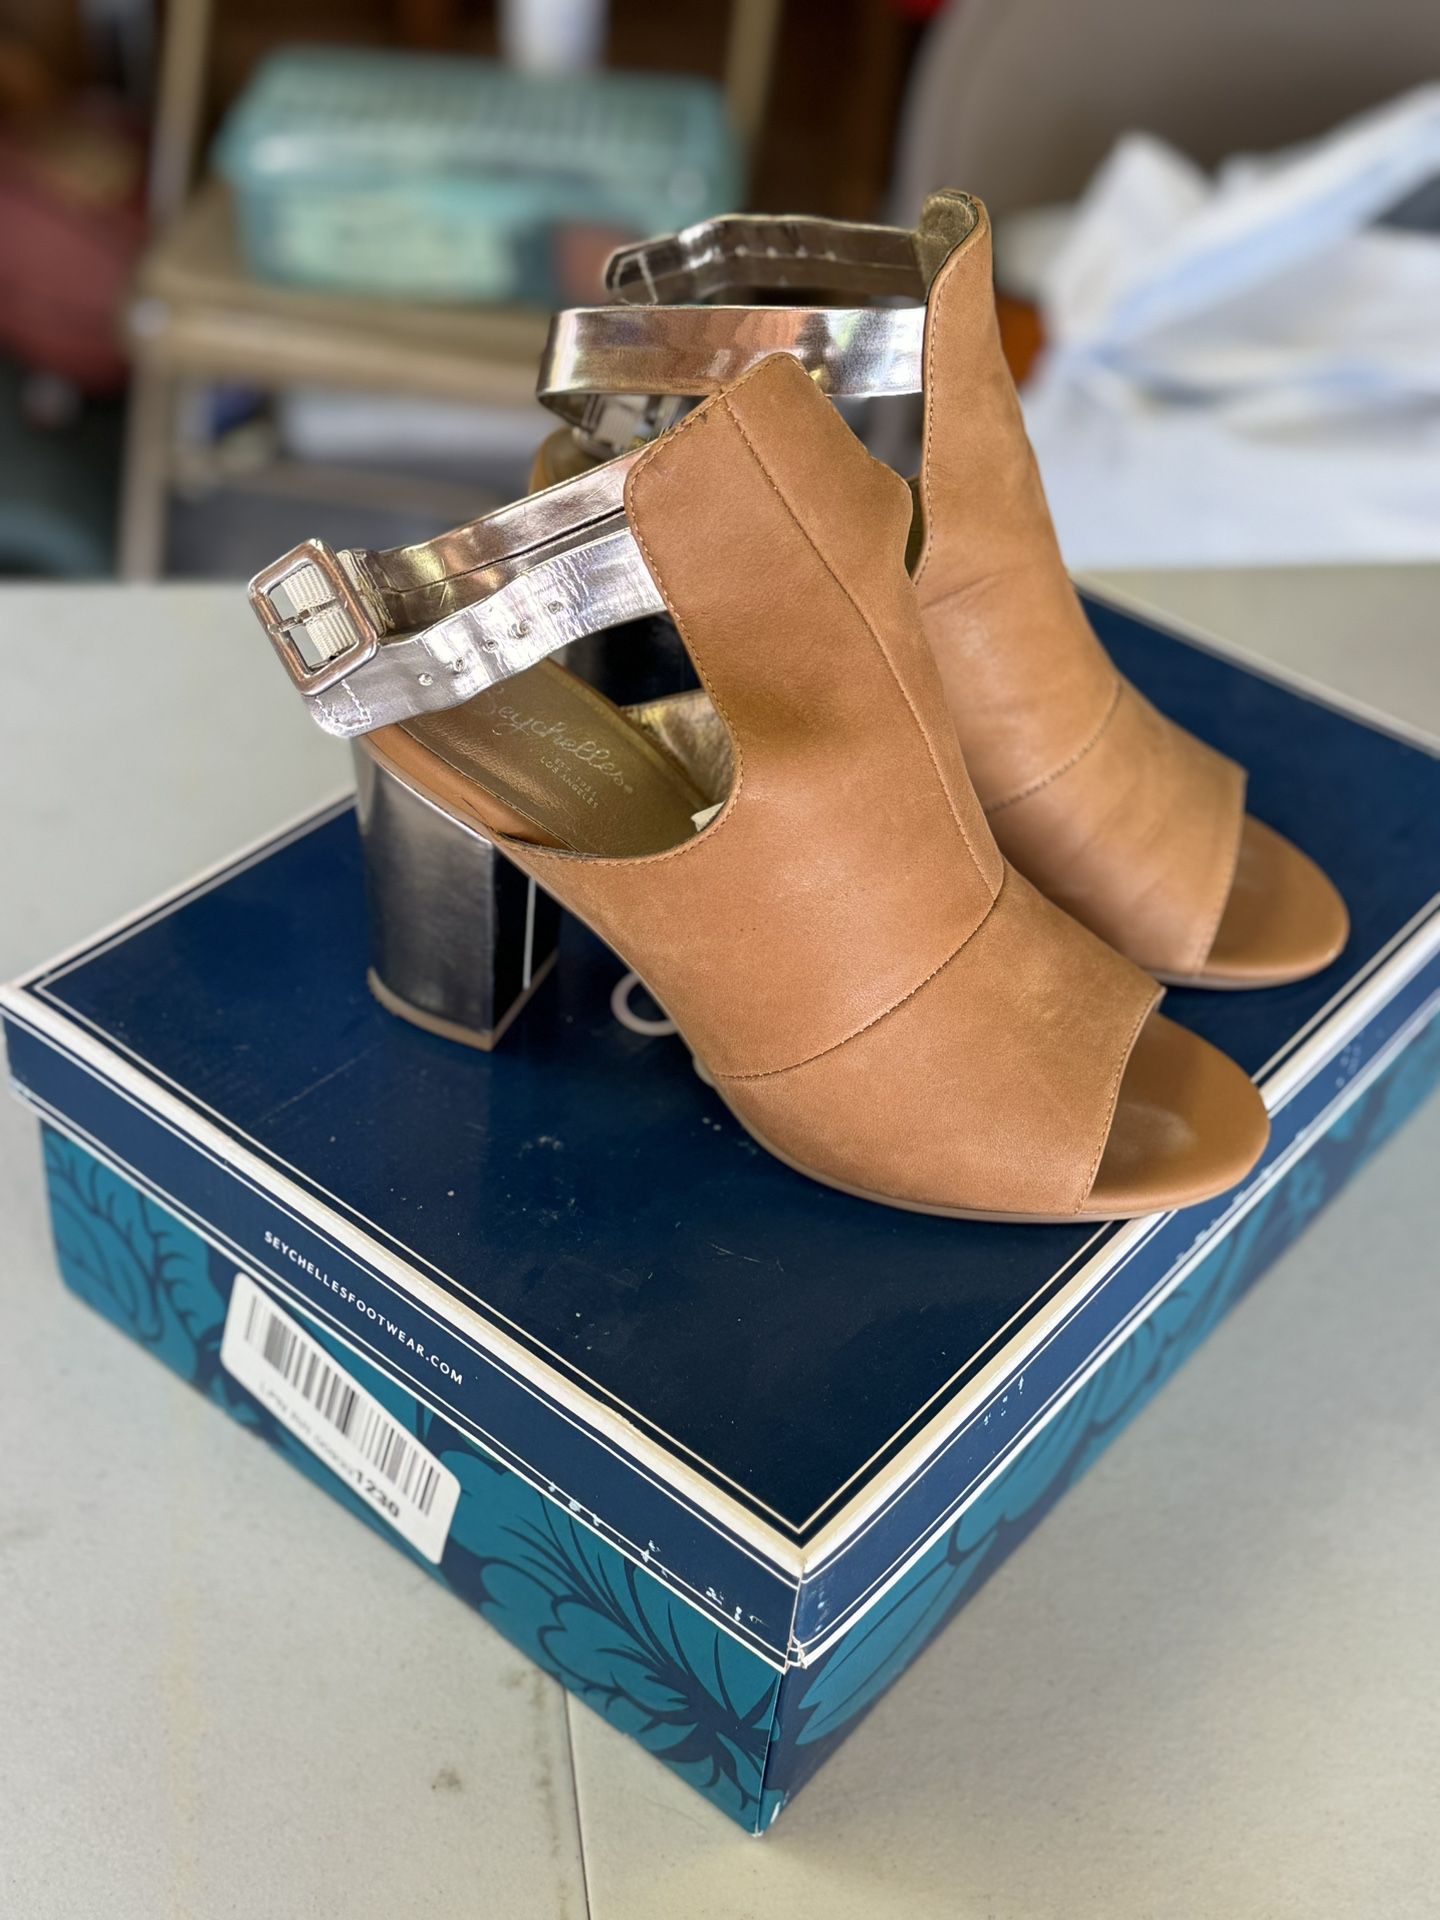 Seychelles Discovery Leather Sandal/heels, Size 7